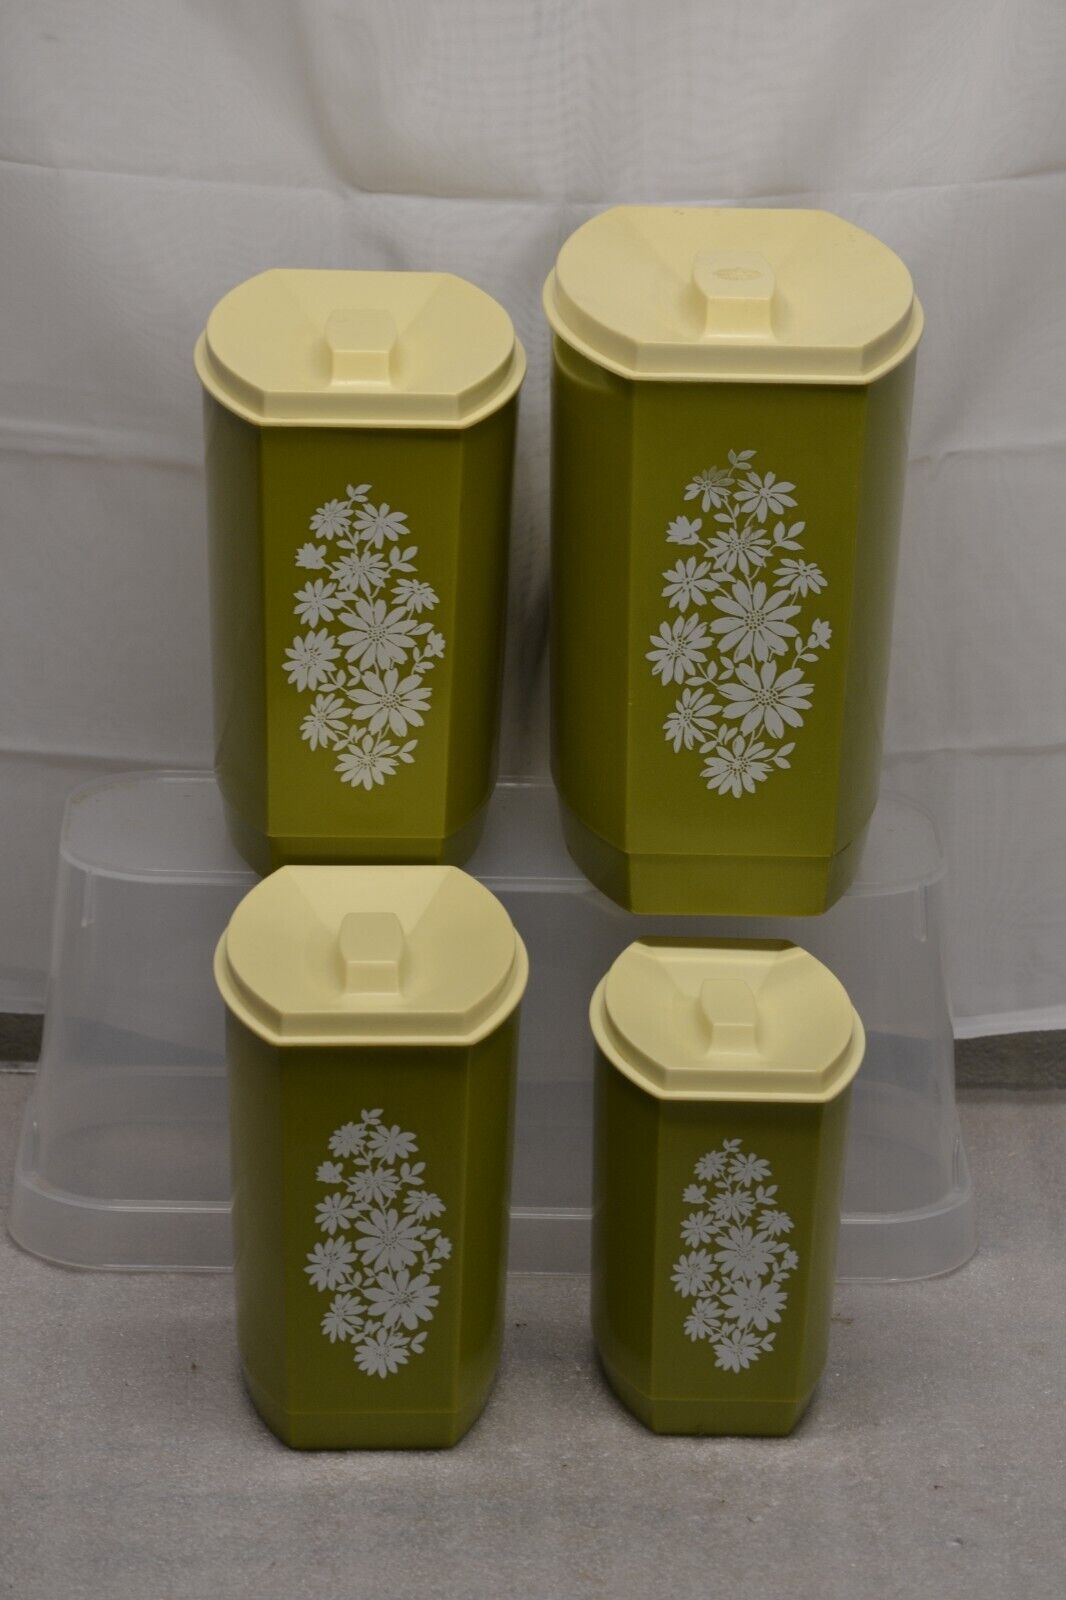 MID CENTURY MODERN 4 PC PLASTIC AVACODO GREEN CANISTER SET WITH LIDS MCM FLOWERS